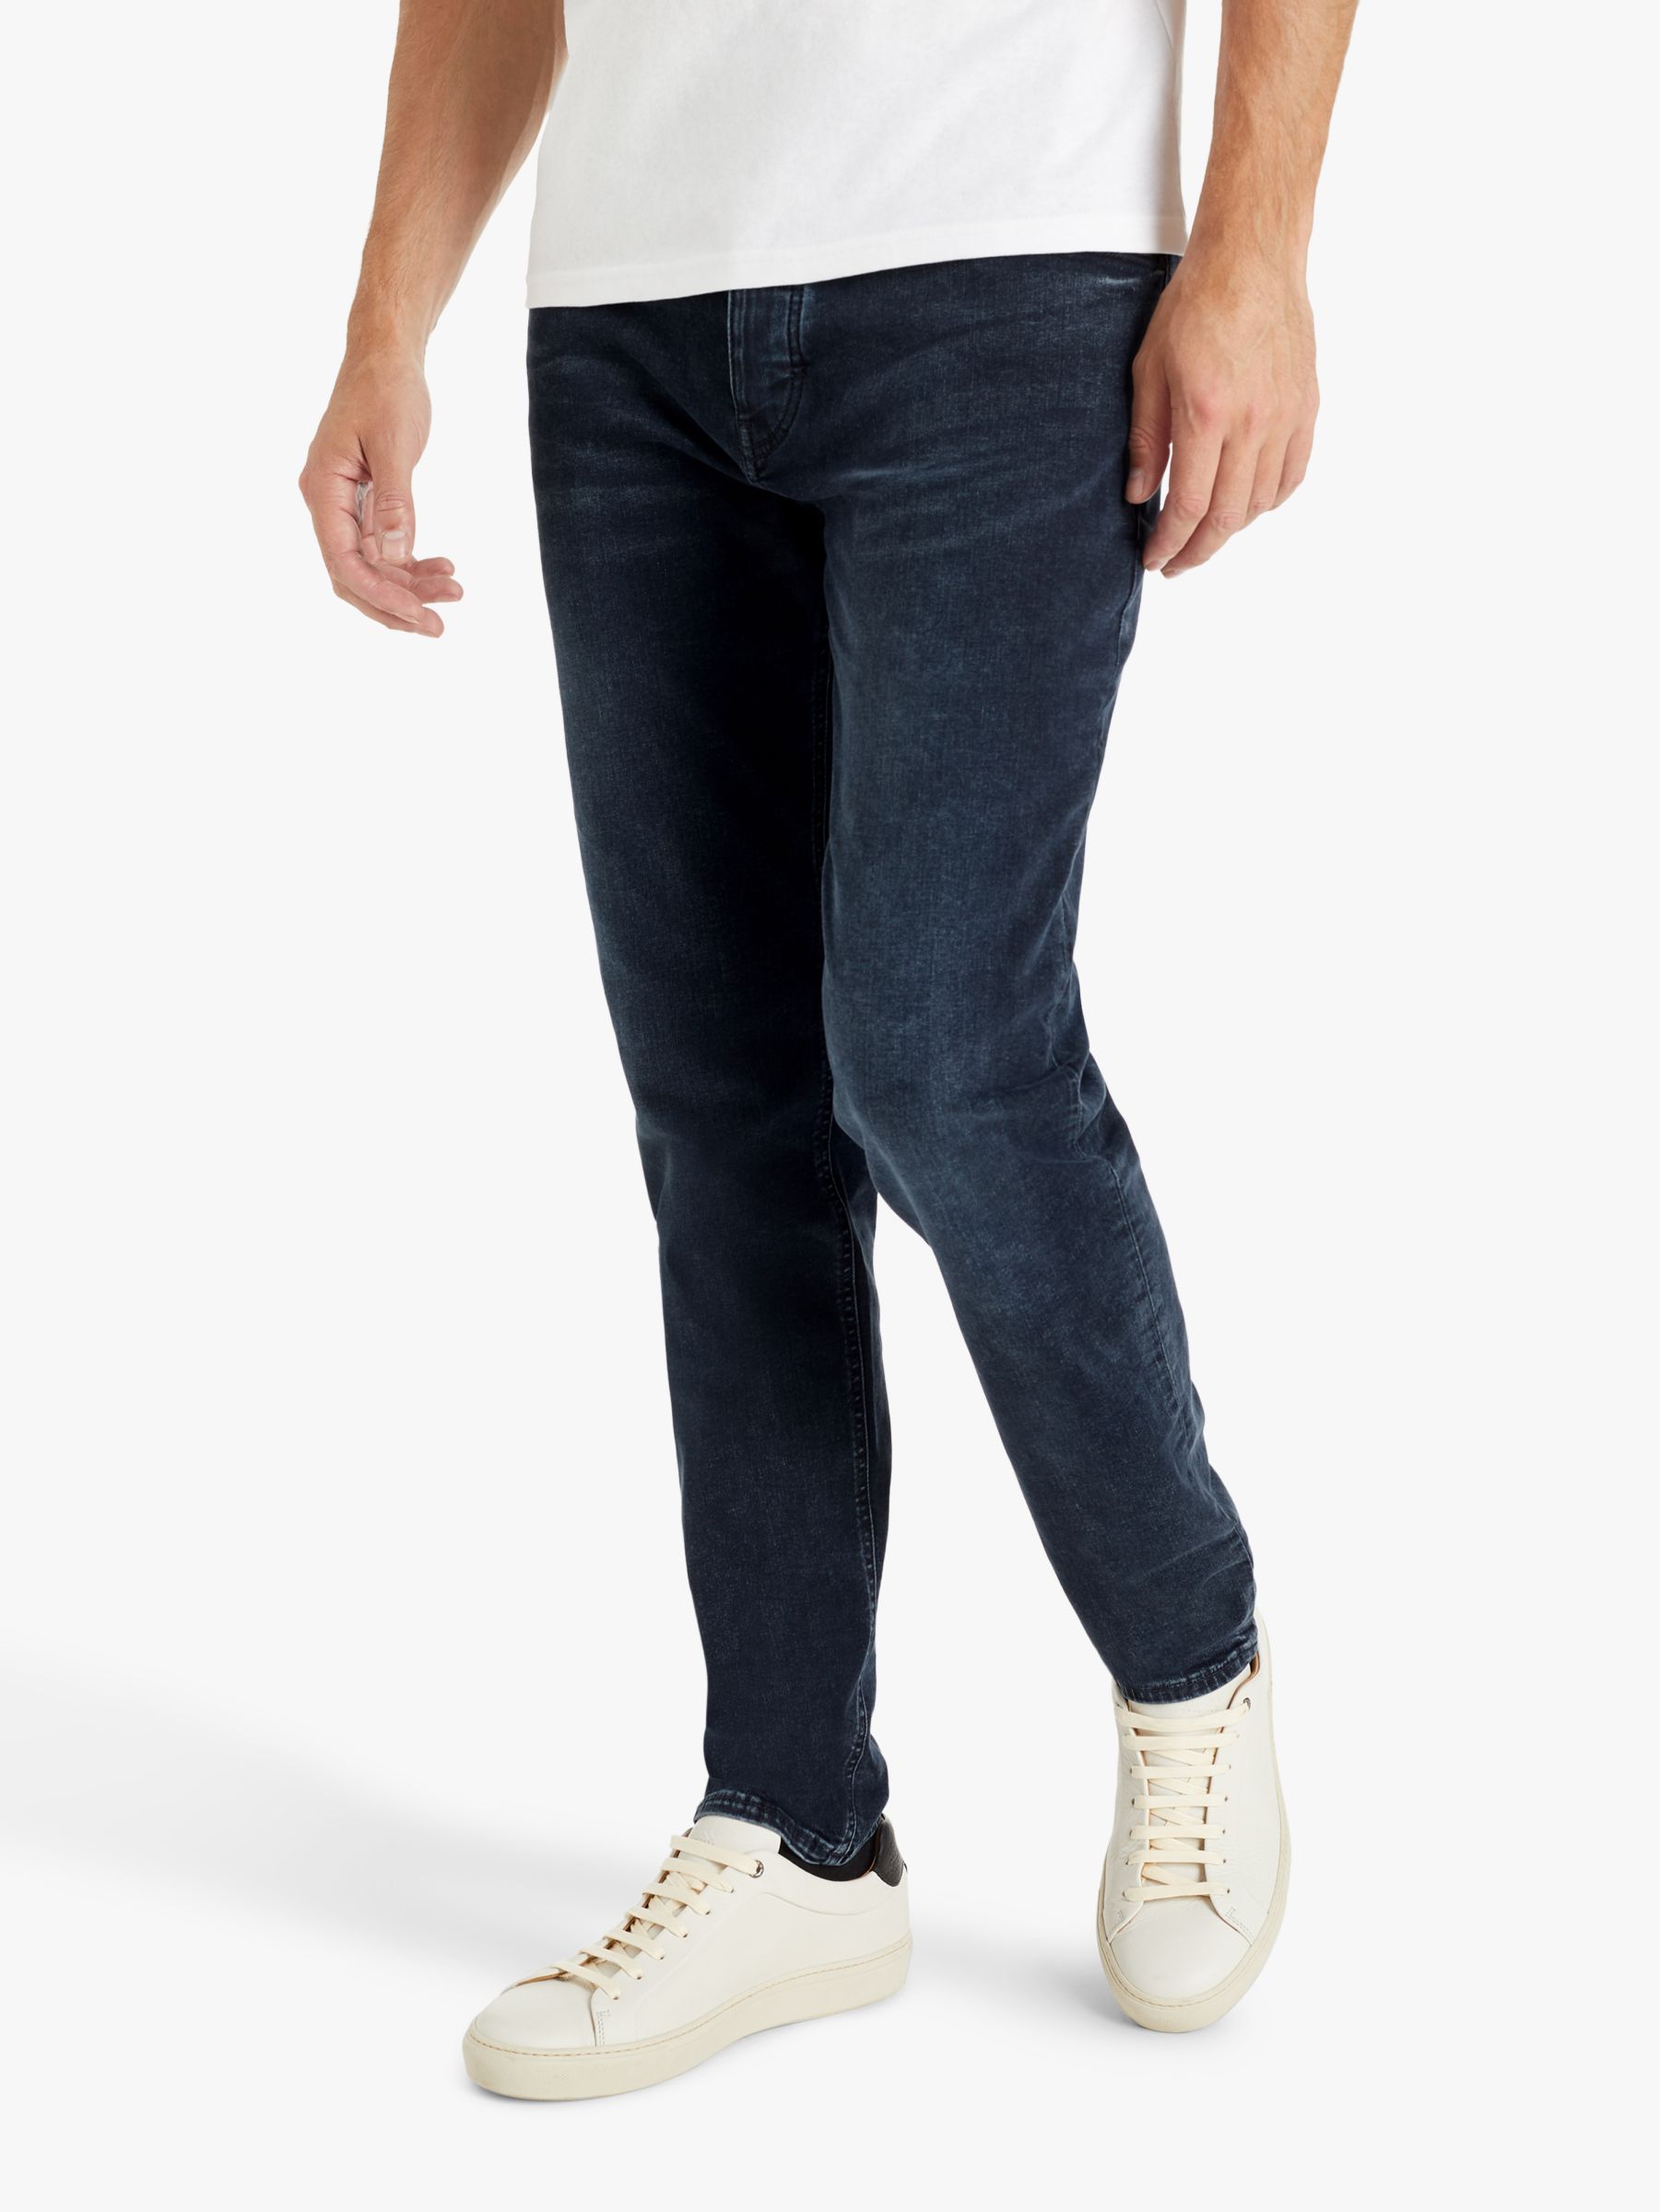 BOSS Taber BC Tapered Fit Jeans, Dark Blue at John Lewis & Partners